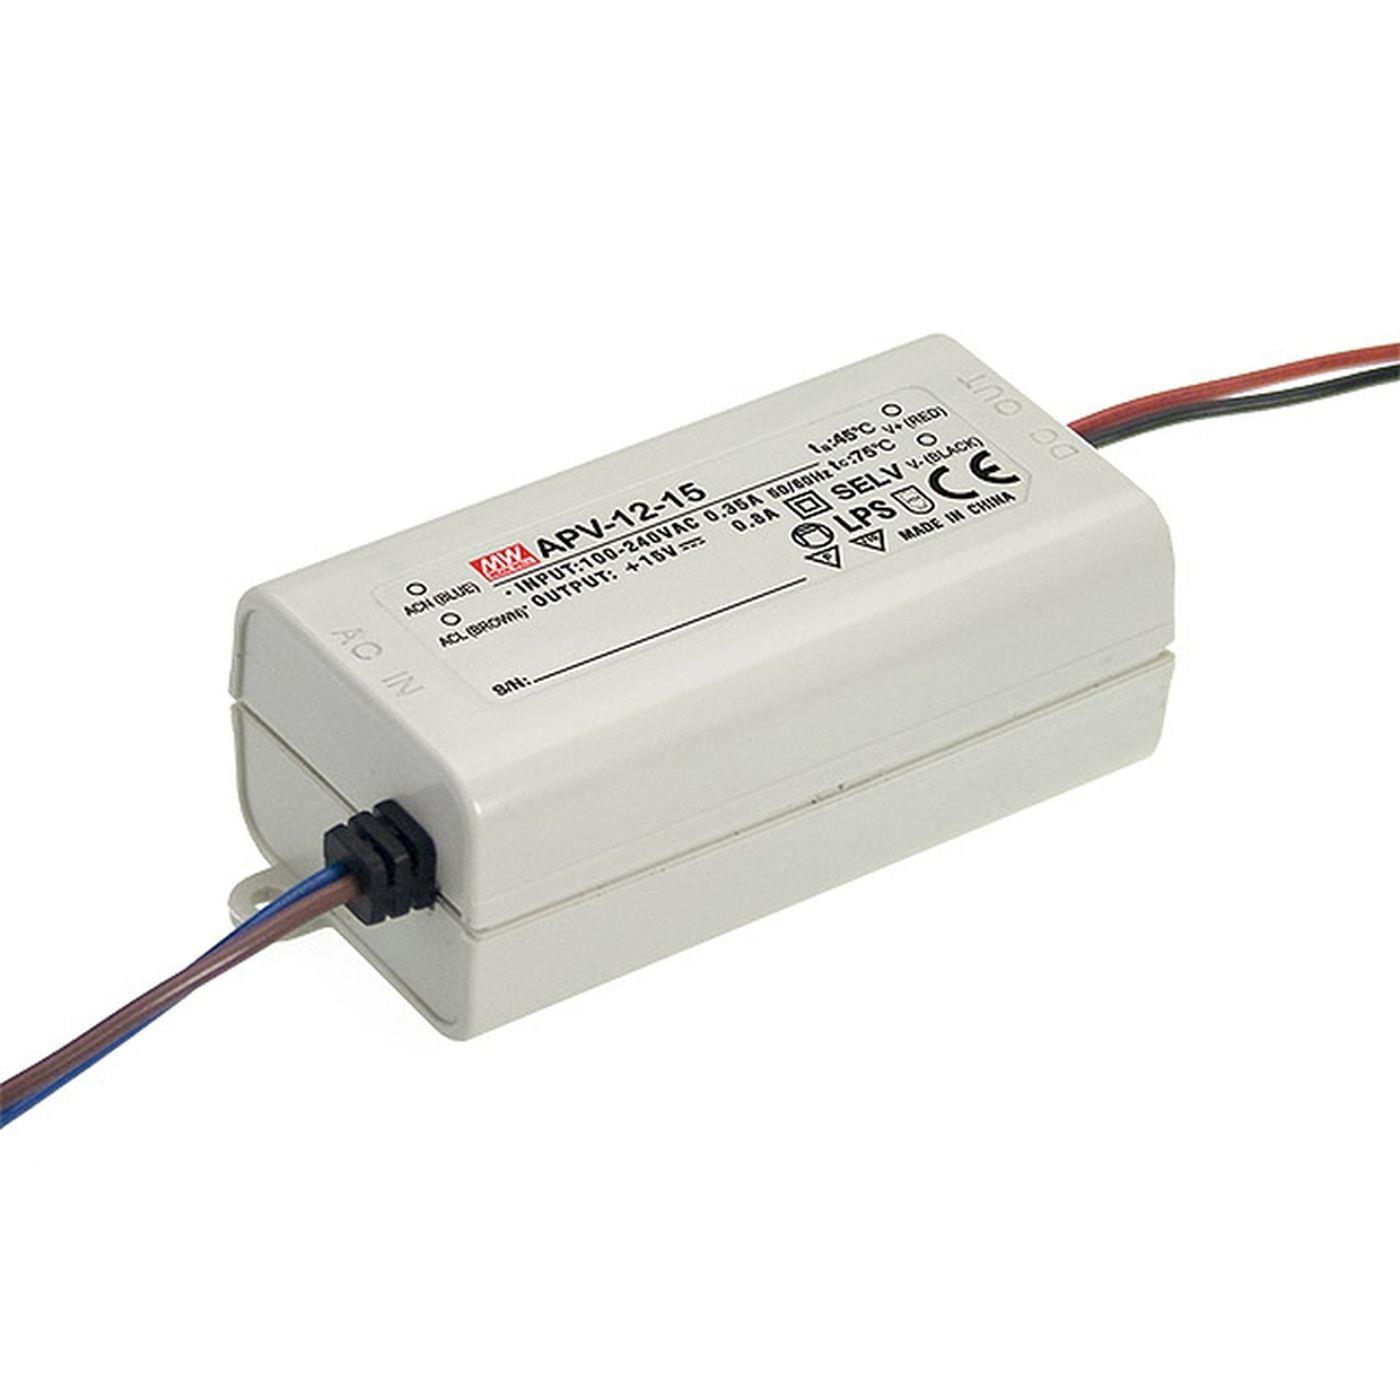 APC-12-700 12W 700mA 9...18VDC Constant current LED power supply Driver Transformer